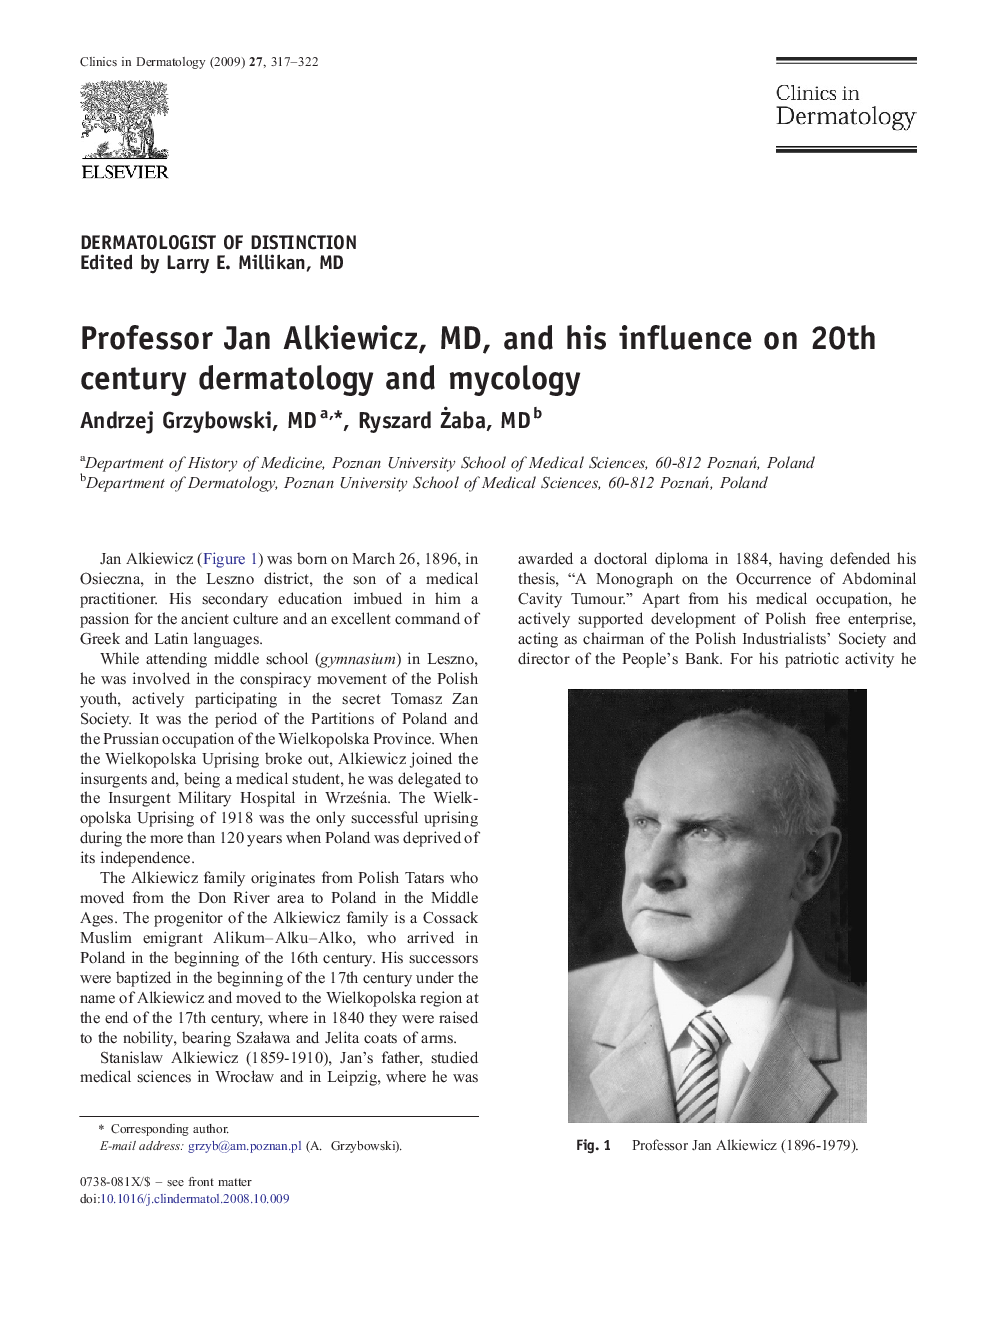 Professor Jan Alkiewicz, MD, and his influence on 20th century dermatology and mycology